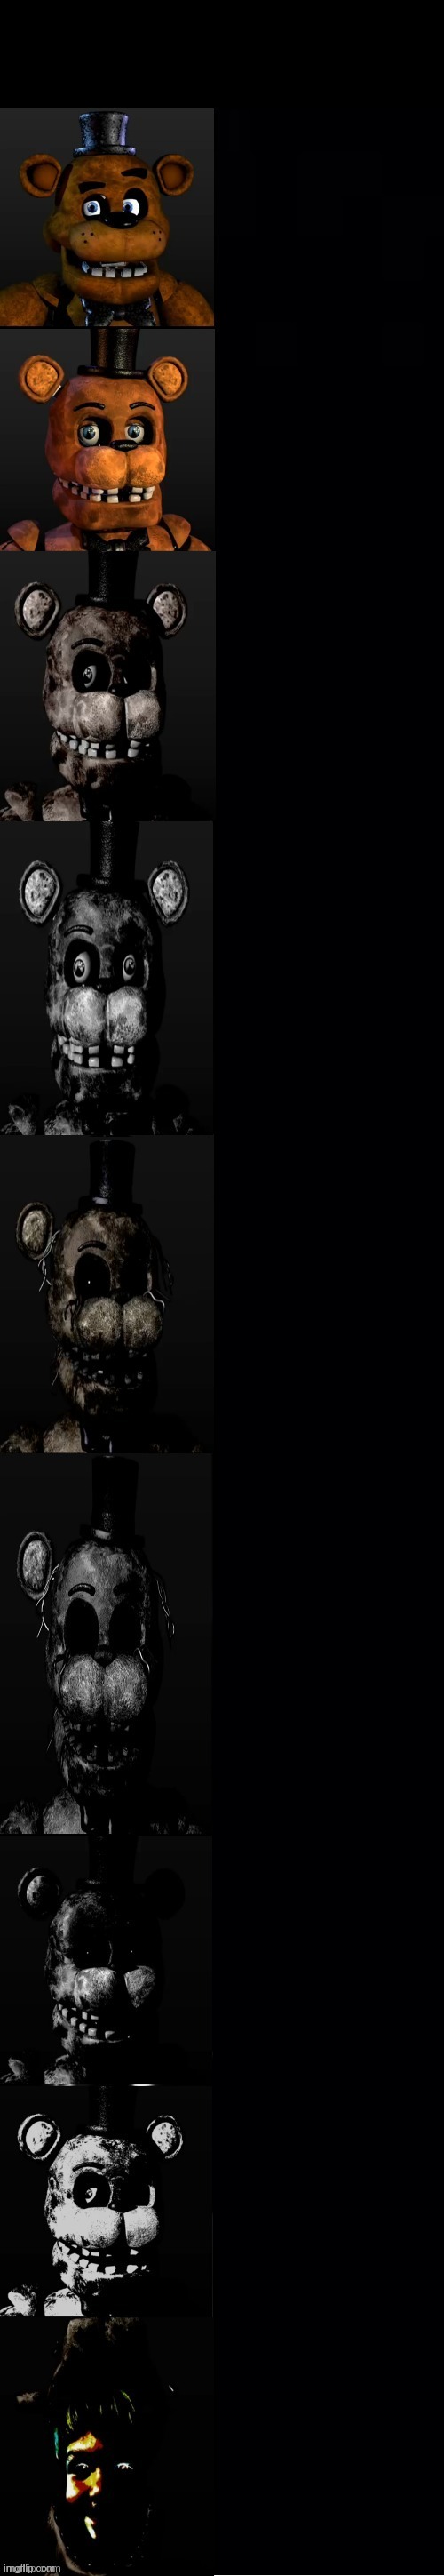 Freddy fazbear becoming uncanny | image tagged in freddy fazbear becoming uncanny meme,fnaf,custom template | made w/ Imgflip meme maker